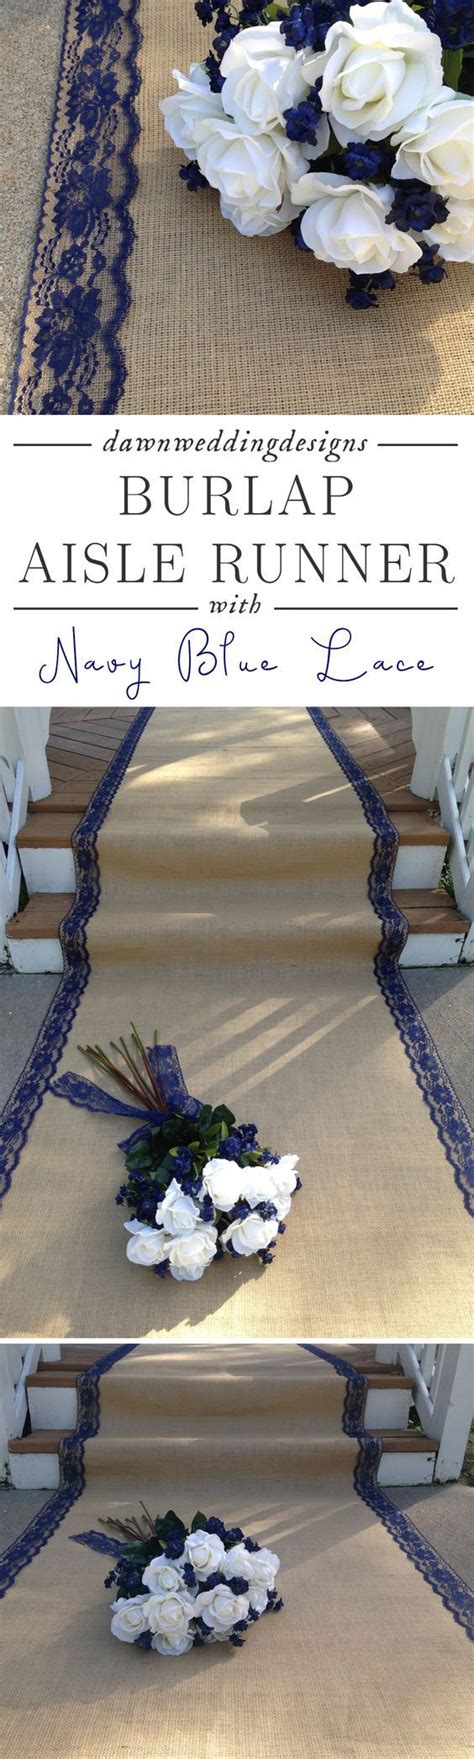 30 Ft Burlap And Lace Aisle Runner Navydark Blue Lace Rustic